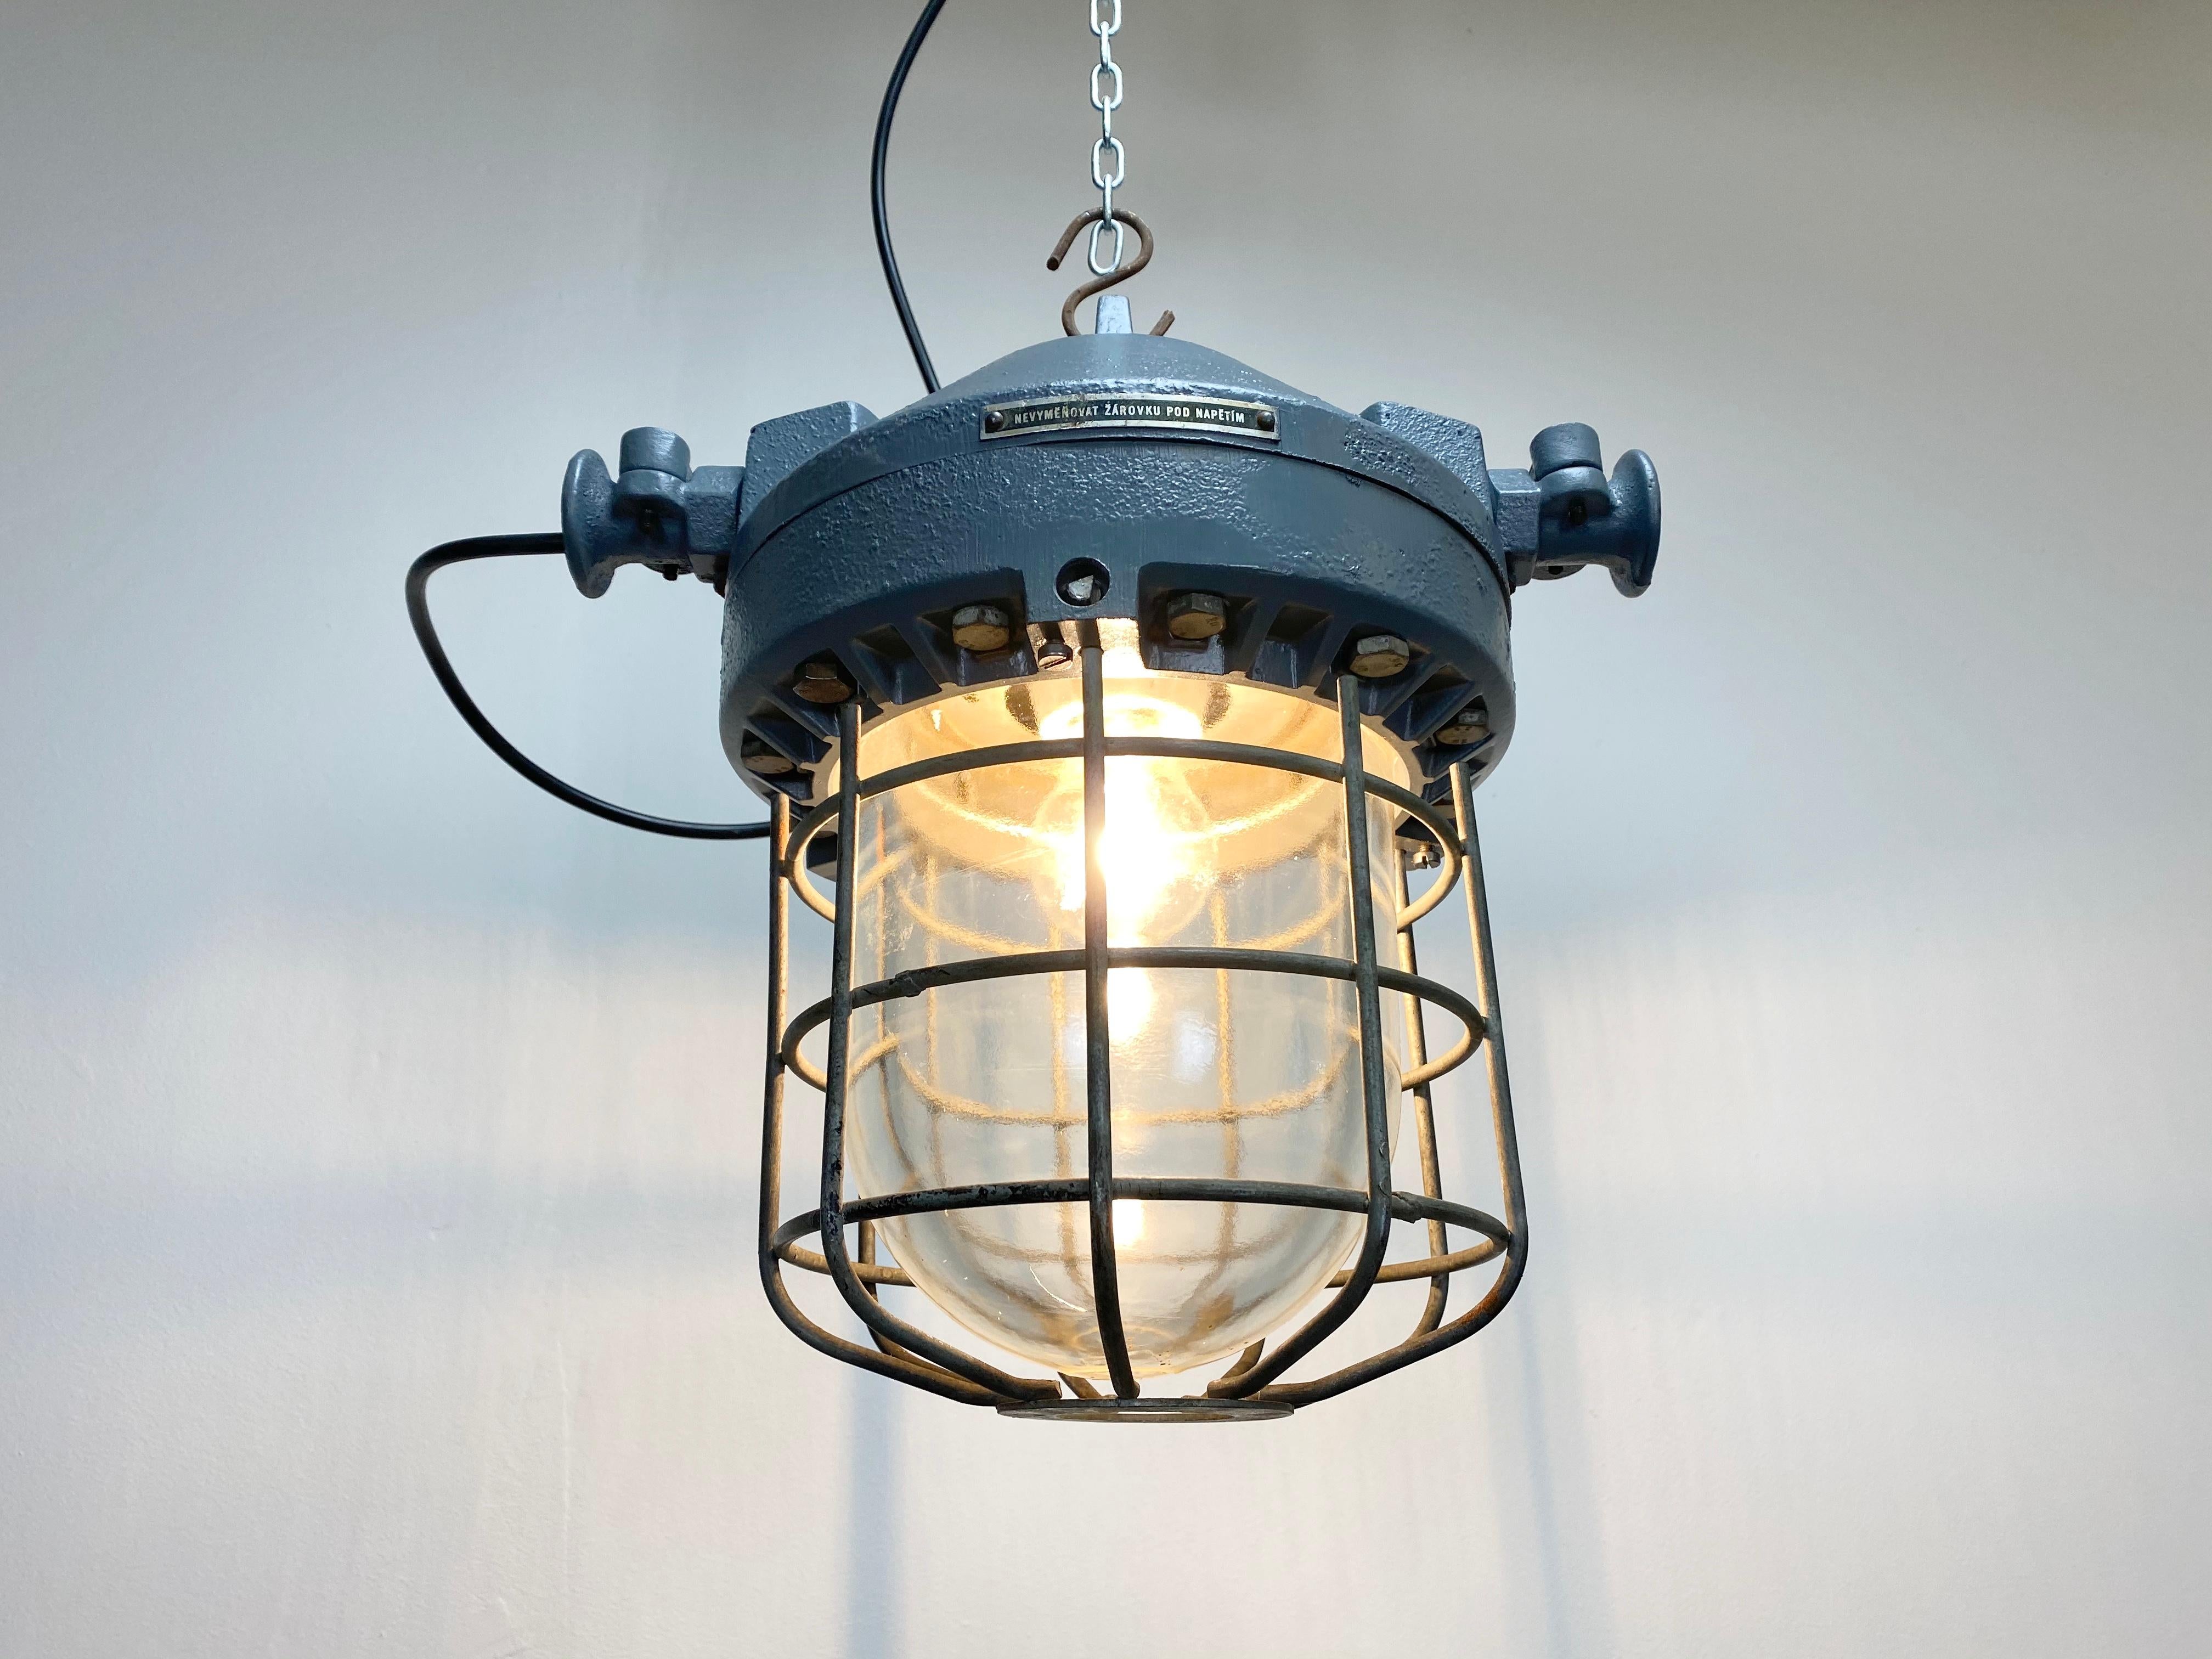 Late 20th Century Dark Grey Industrial Explosion Proof Lamp, 1970s